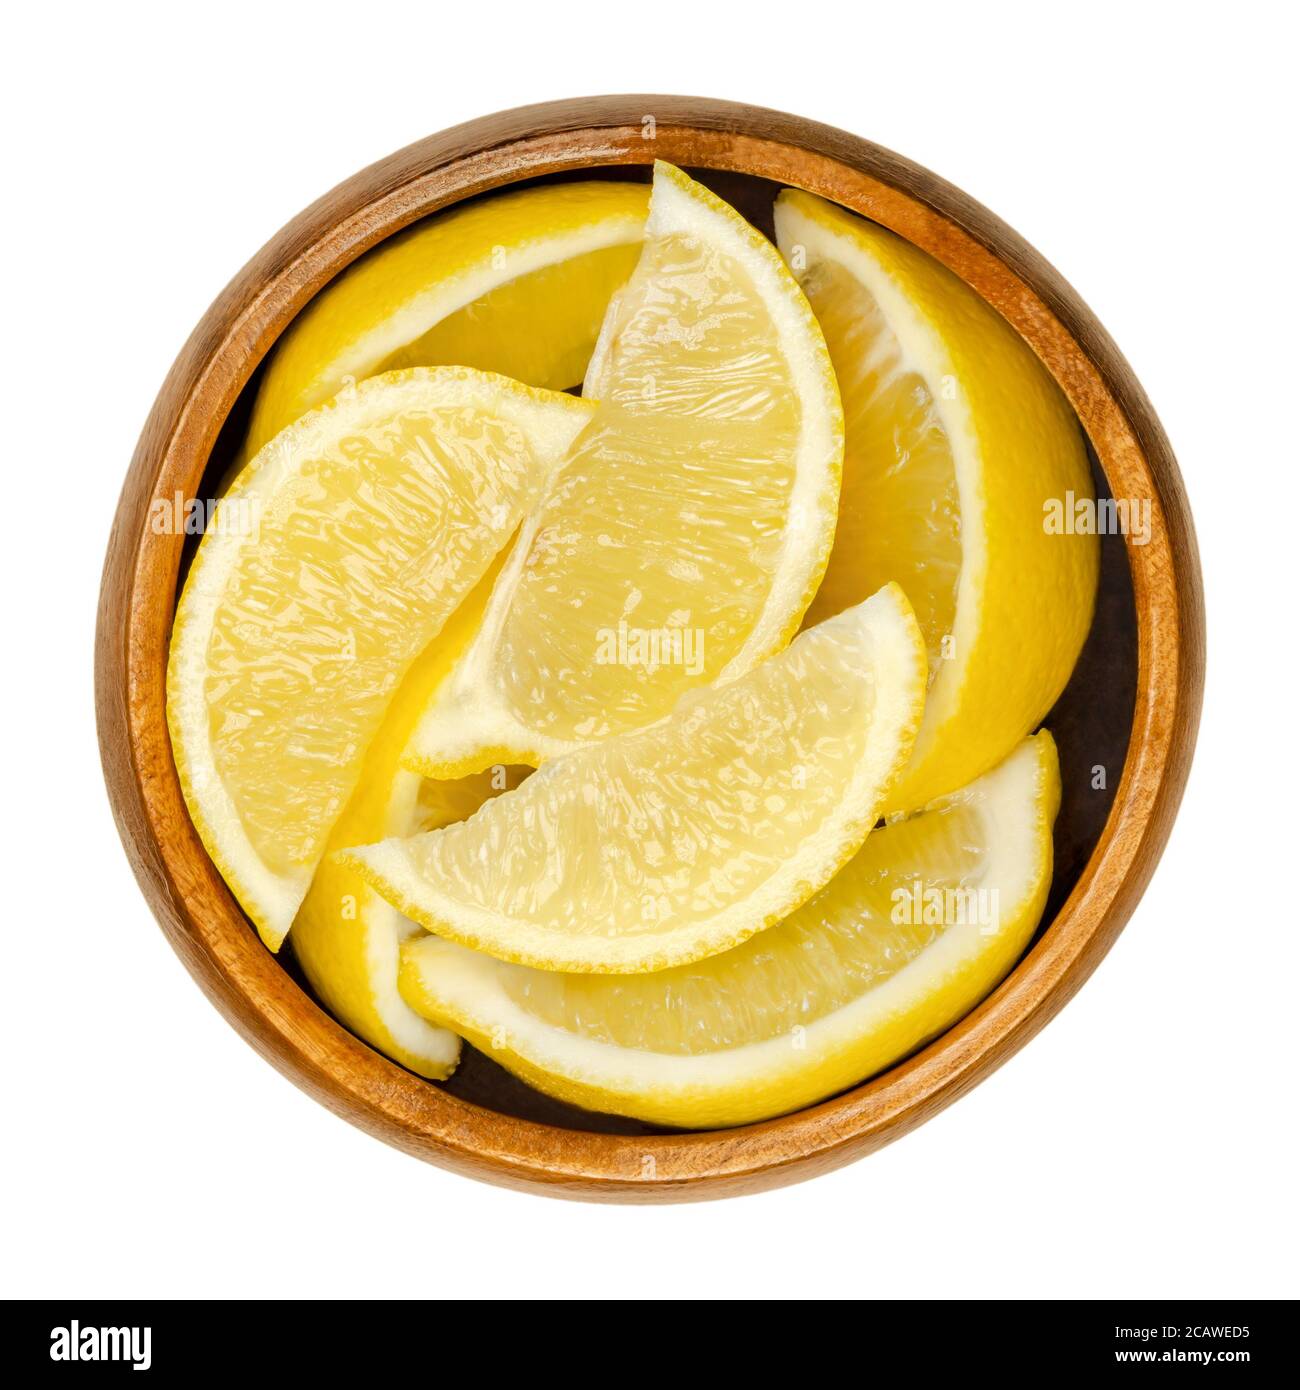 Lemon half in wooden bowl. Freshly cut ripe yellow edible citrus fruit. Citrus limon. Lemon juice is used for culinary purposes and for cleaning. Stock Photo